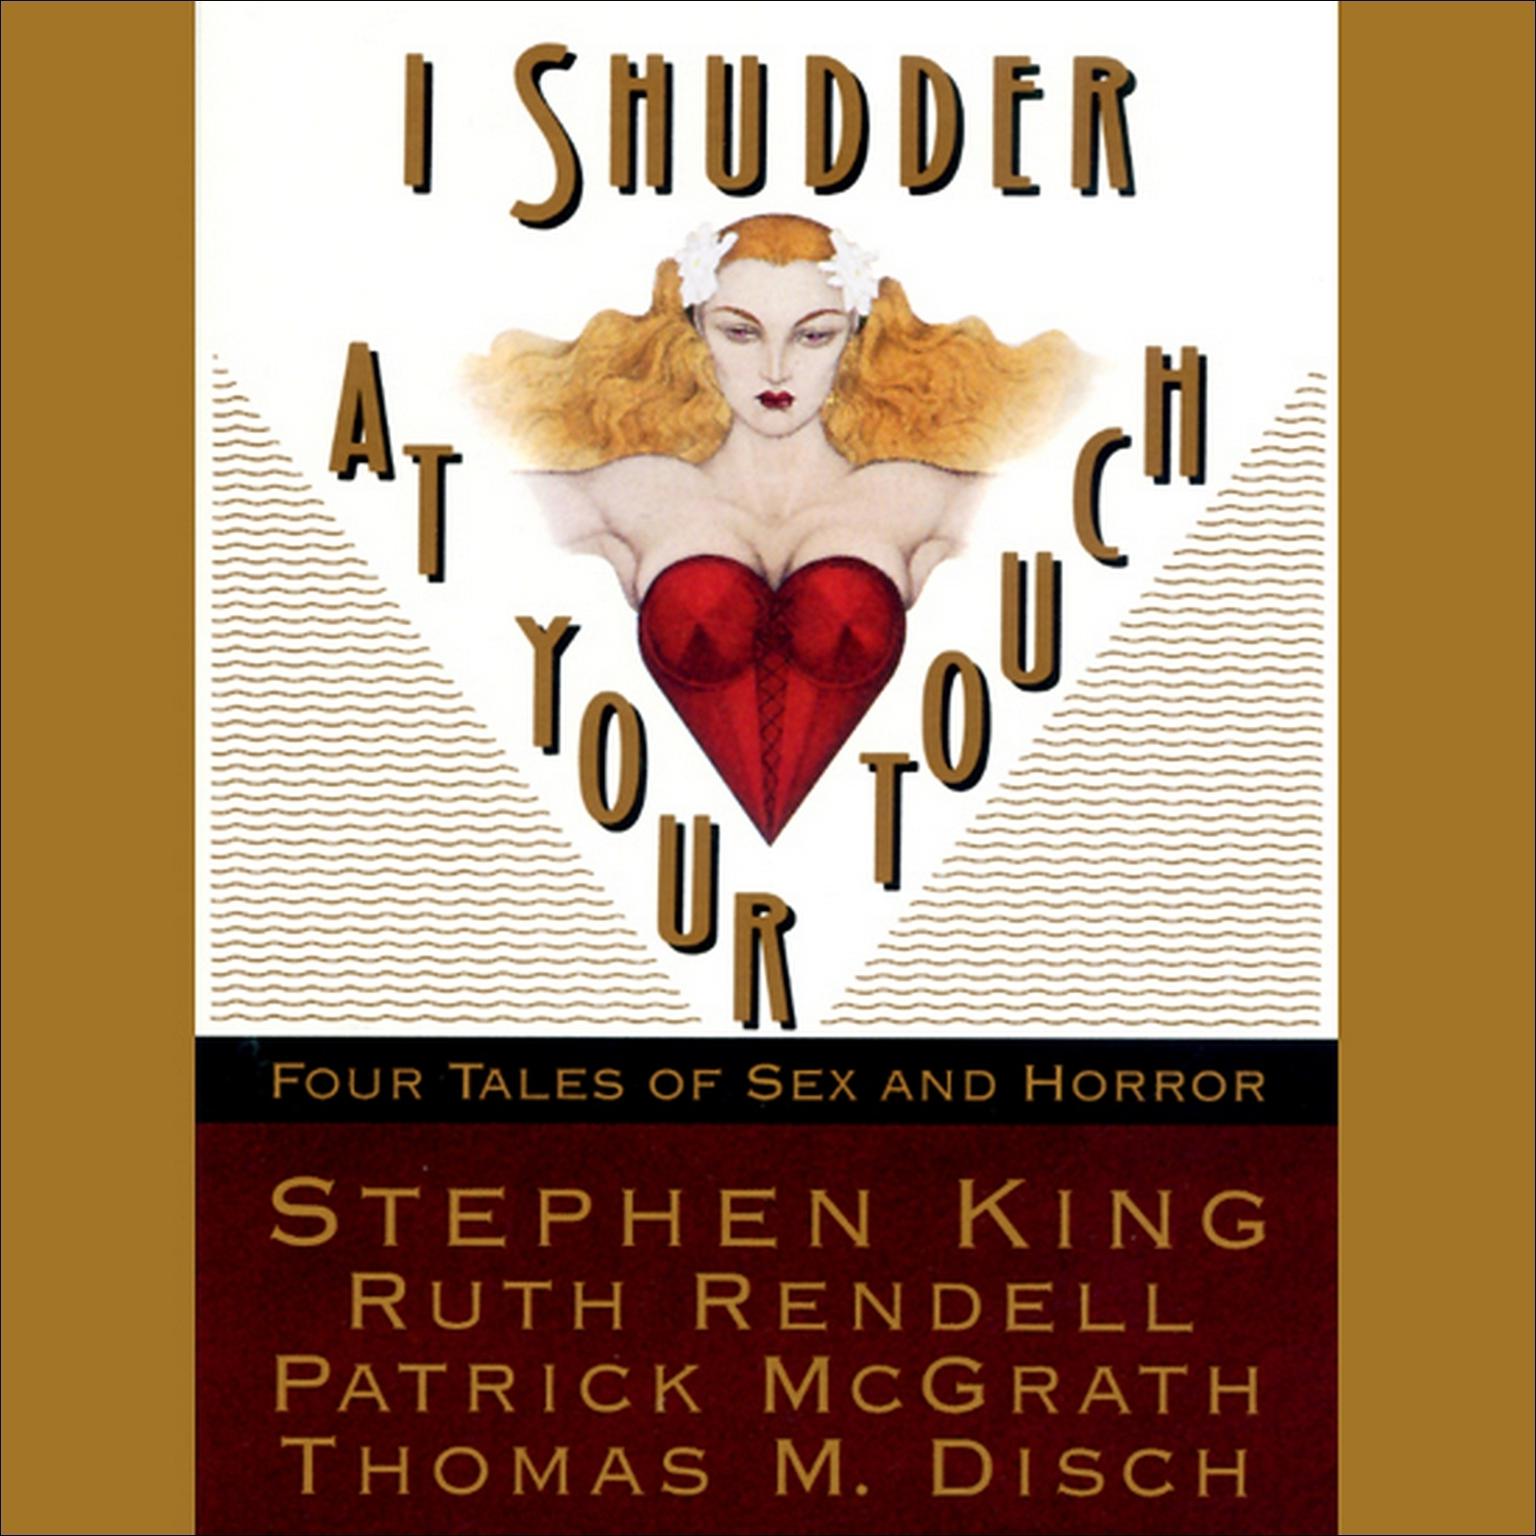 I Shudder at Your Touch (Abridged): Volume One: Four Tales of Sex and Horror Audiobook, by Stephen King